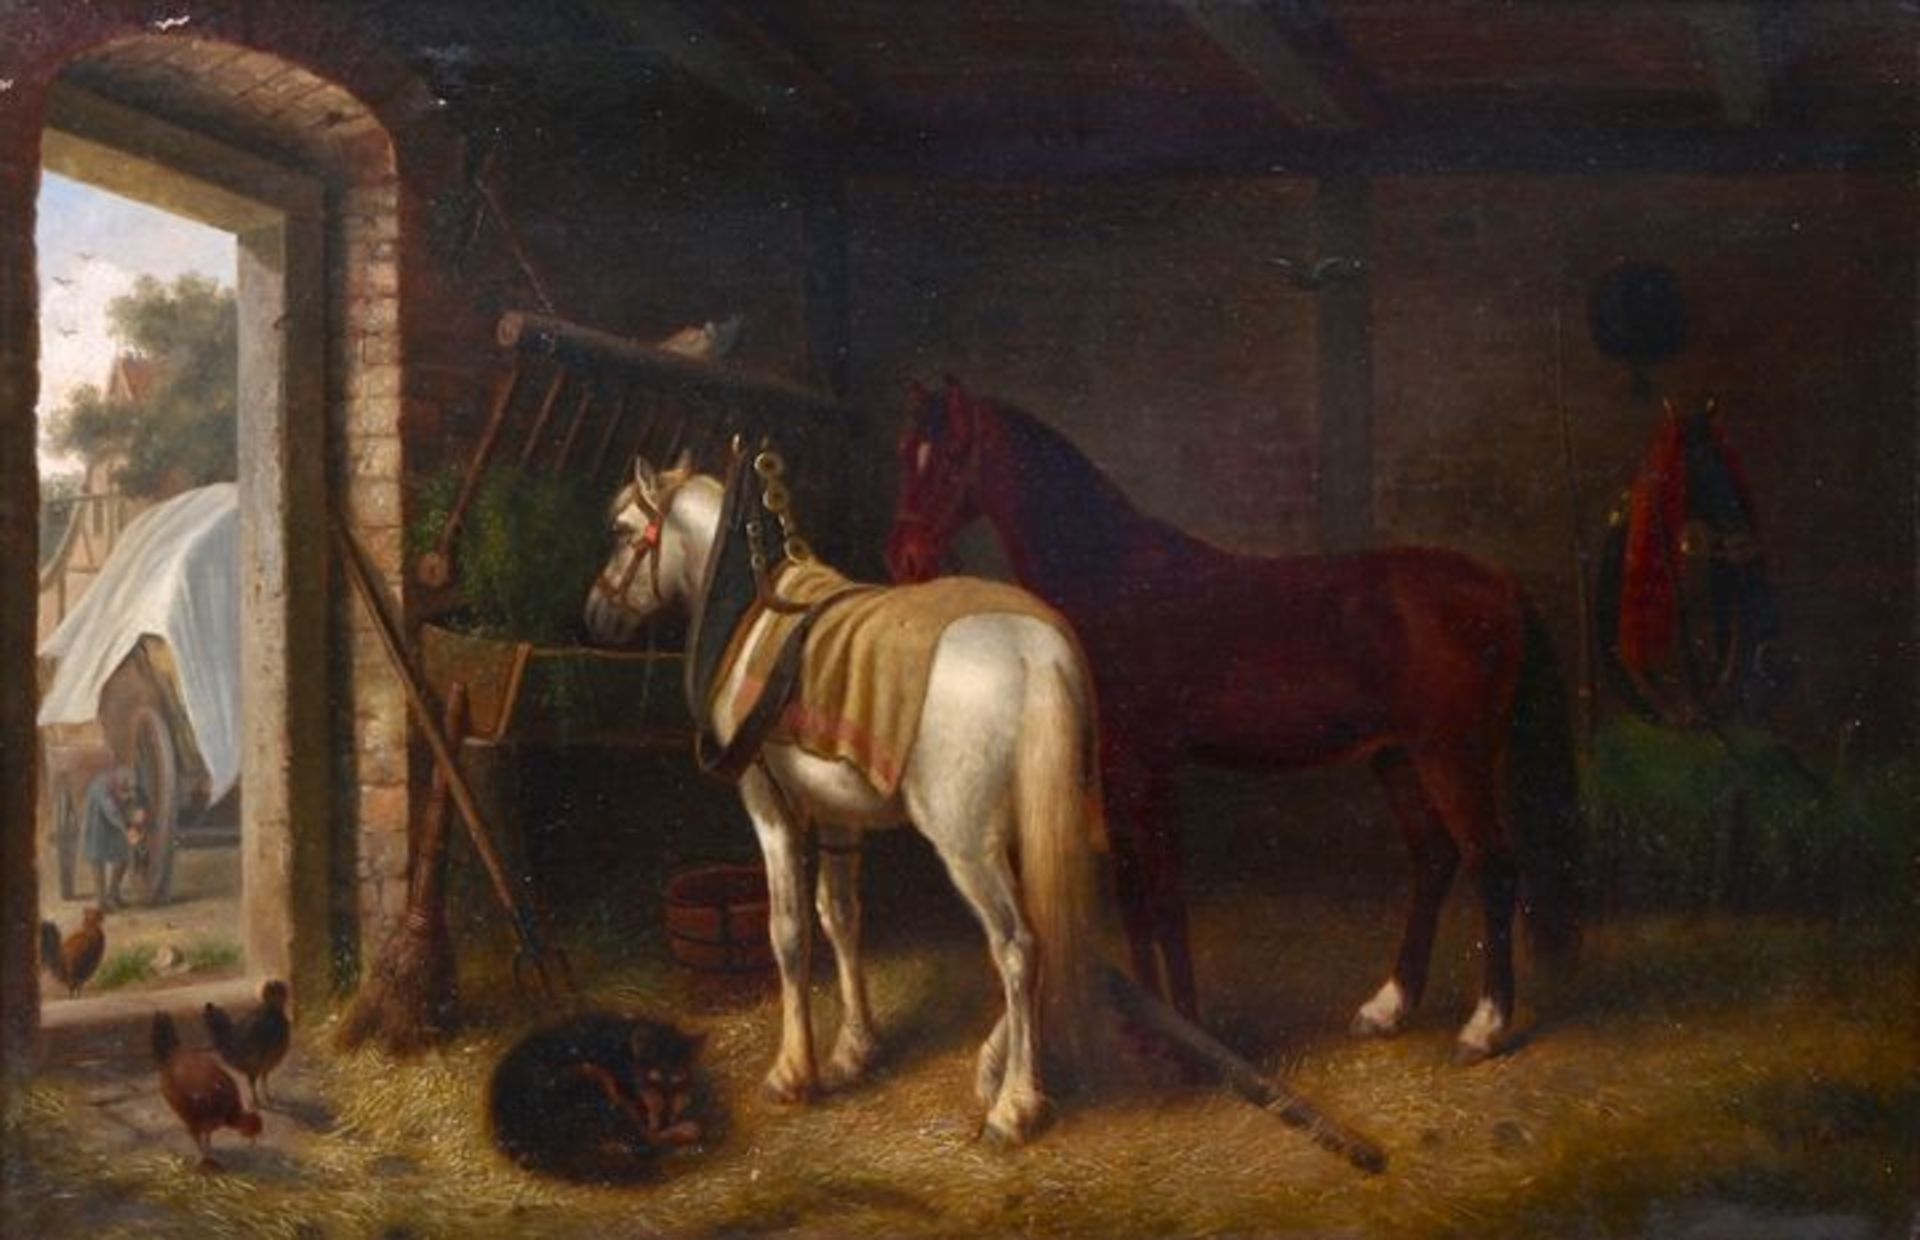 Hahn, Karl Wilhelm, Zwei Pferde im Stall / stable interiour with two horses, painting